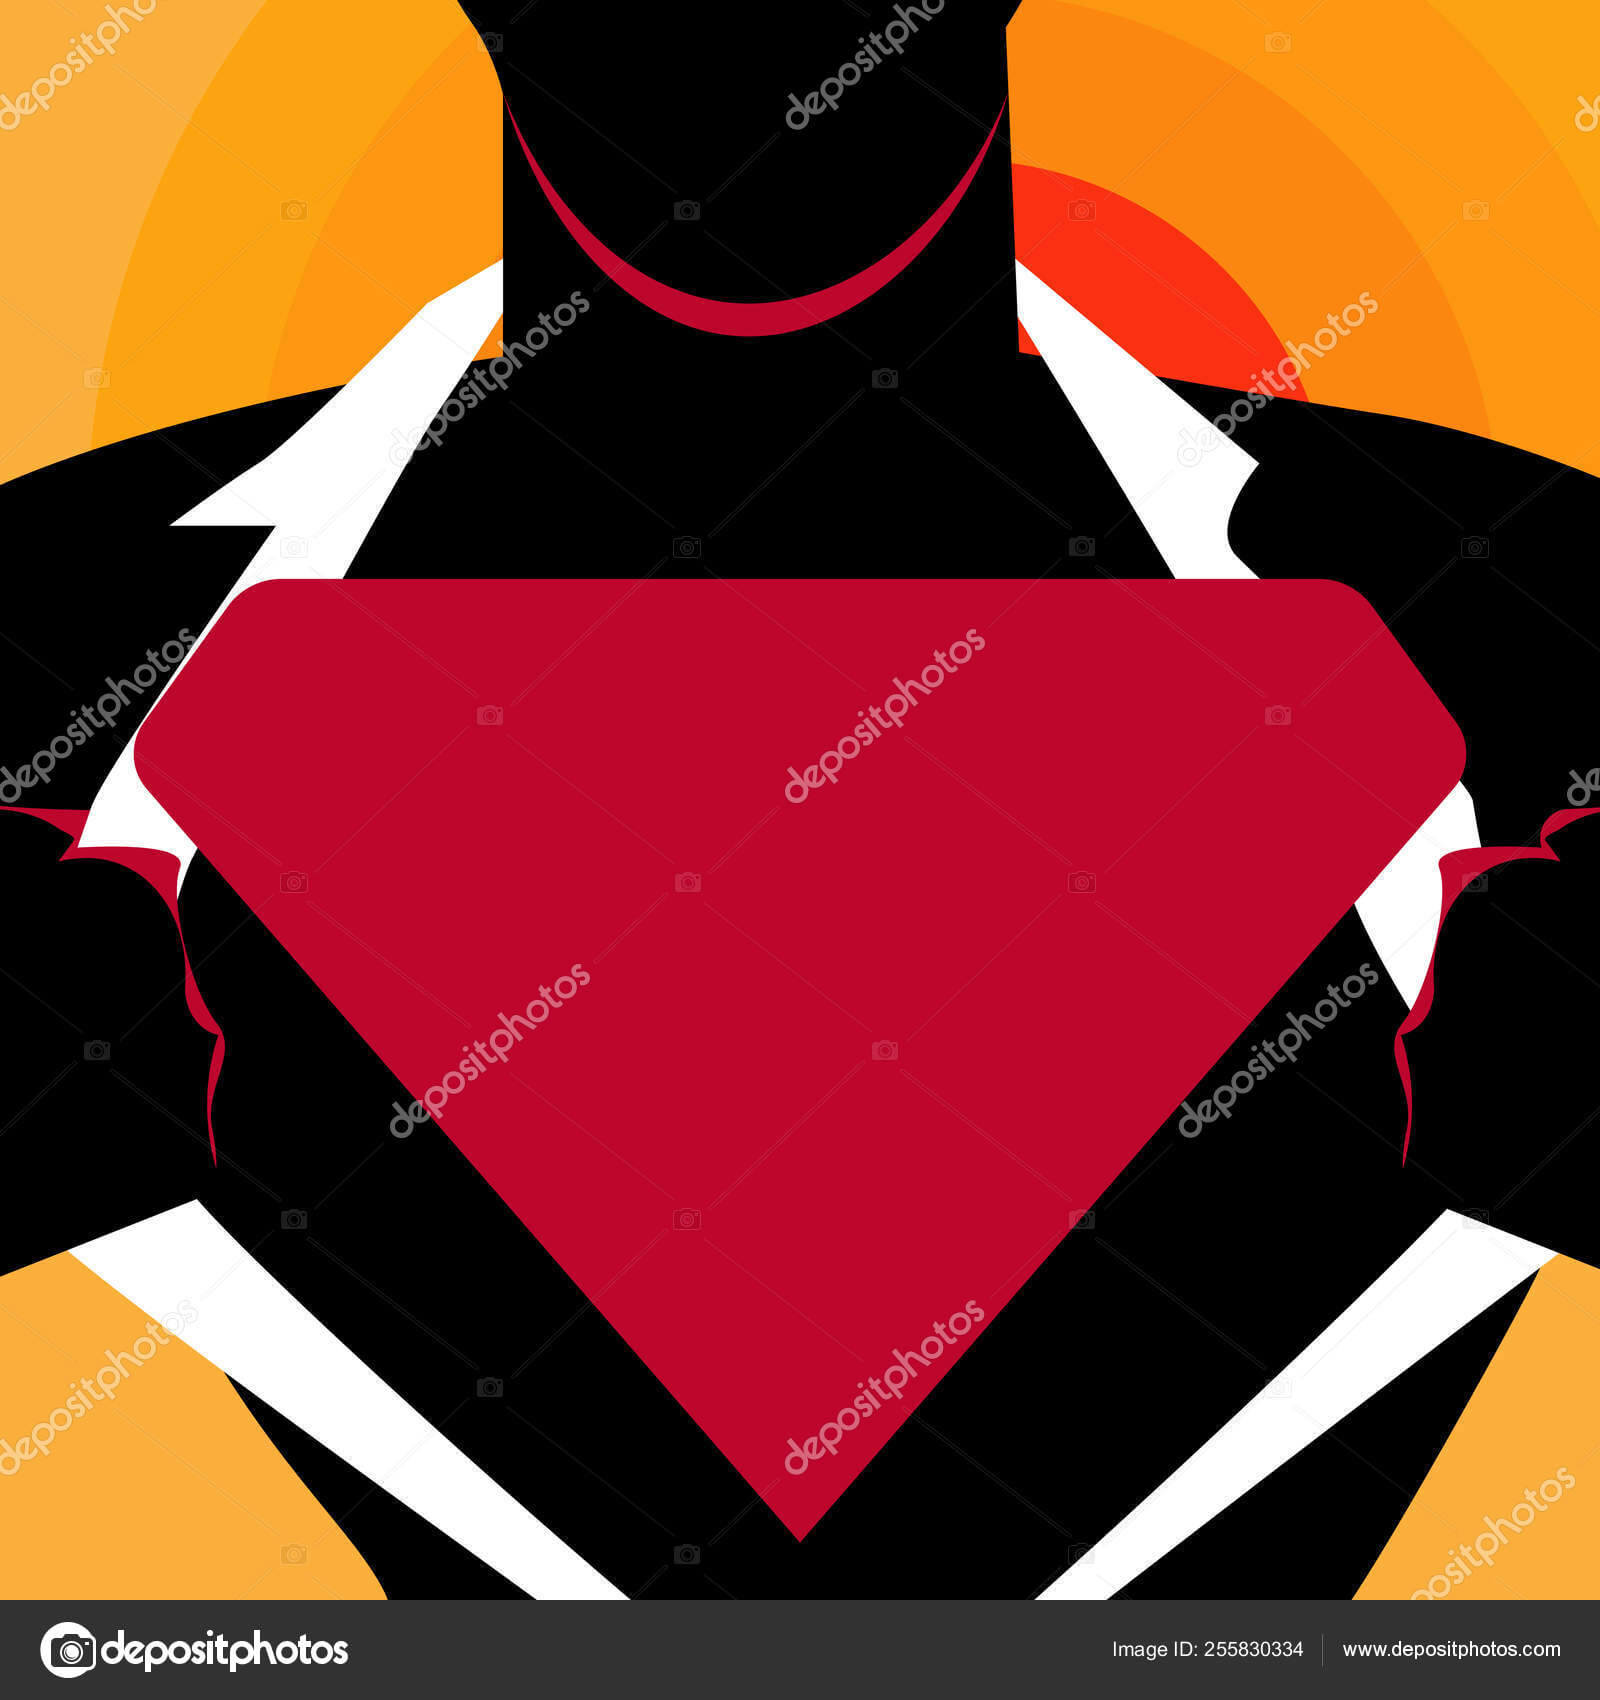 Man In Superman Pose Opening Shirt To Reveal Blank Within Blank Superman Logo Template